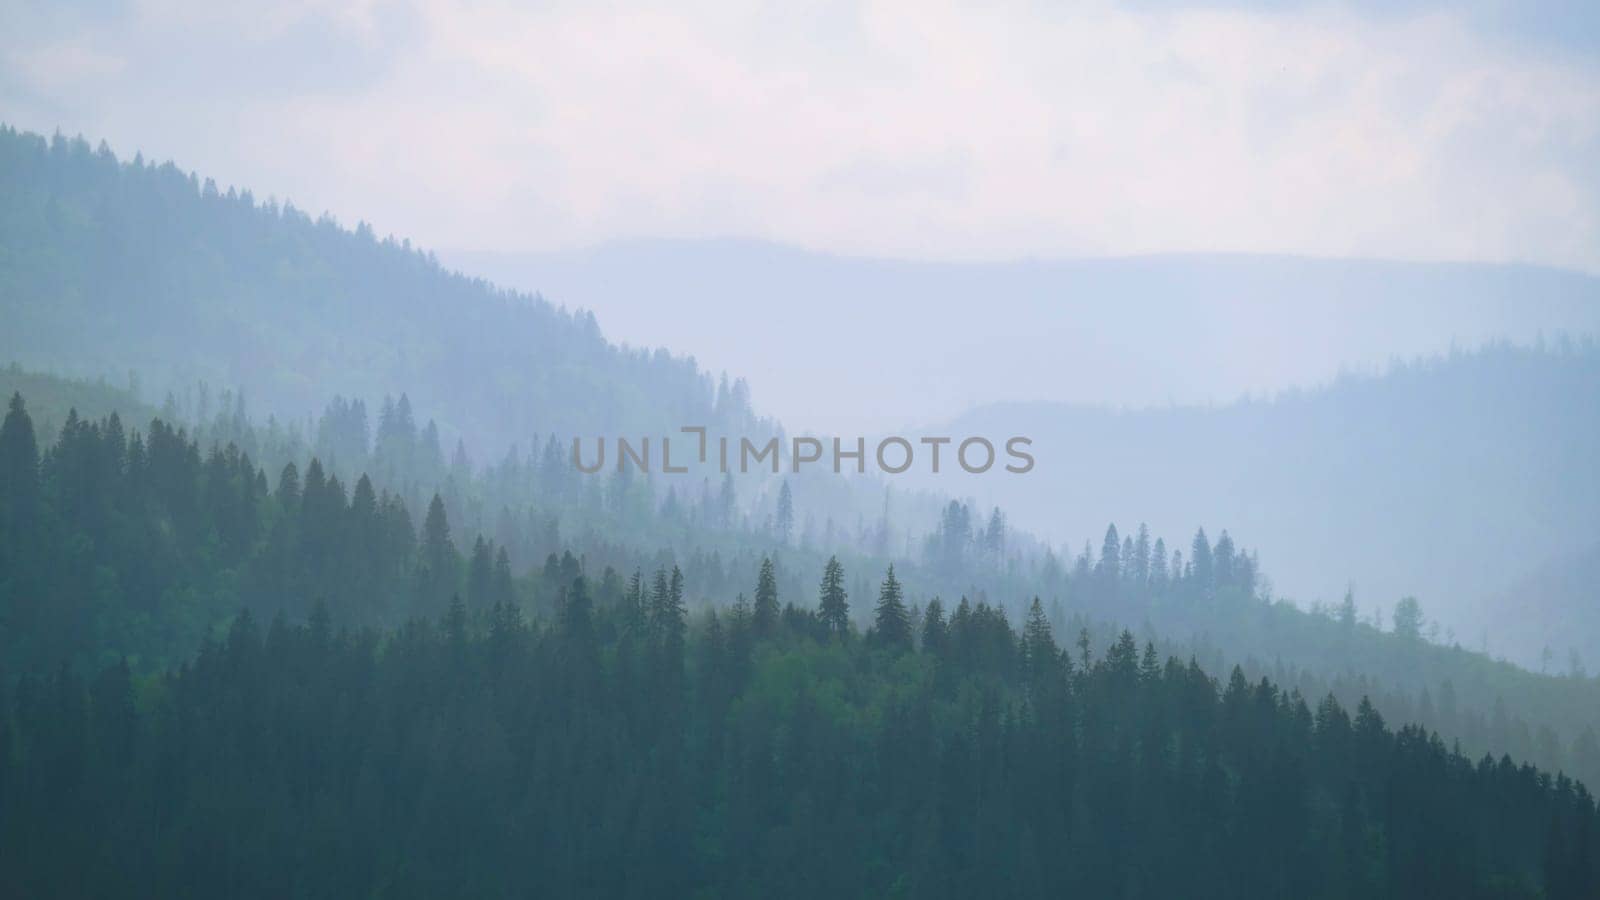 Mountains under mist in the morning Amazing nature scenery. Tourism and travel concept image, Fresh and relax type nature image by igor010